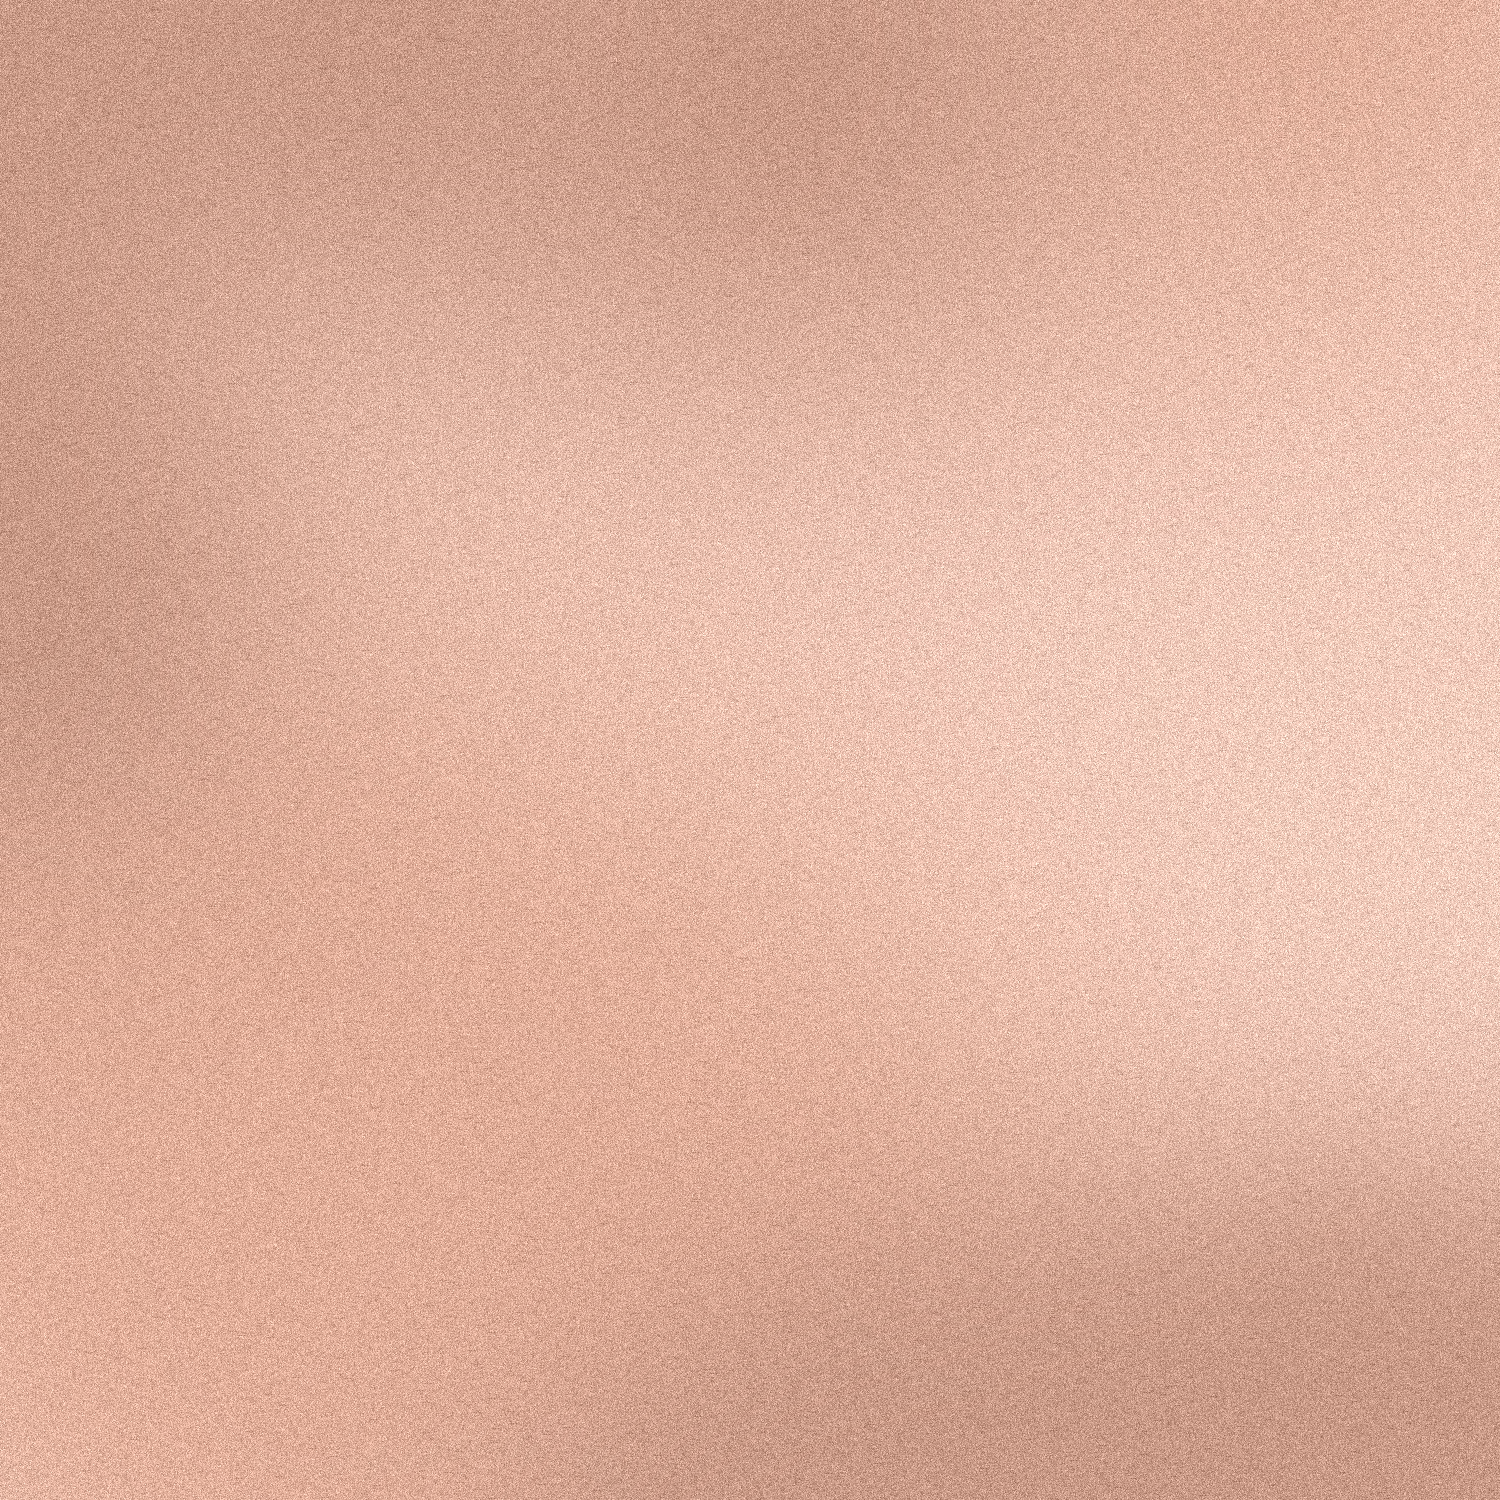 Nude Pink Neutral Background